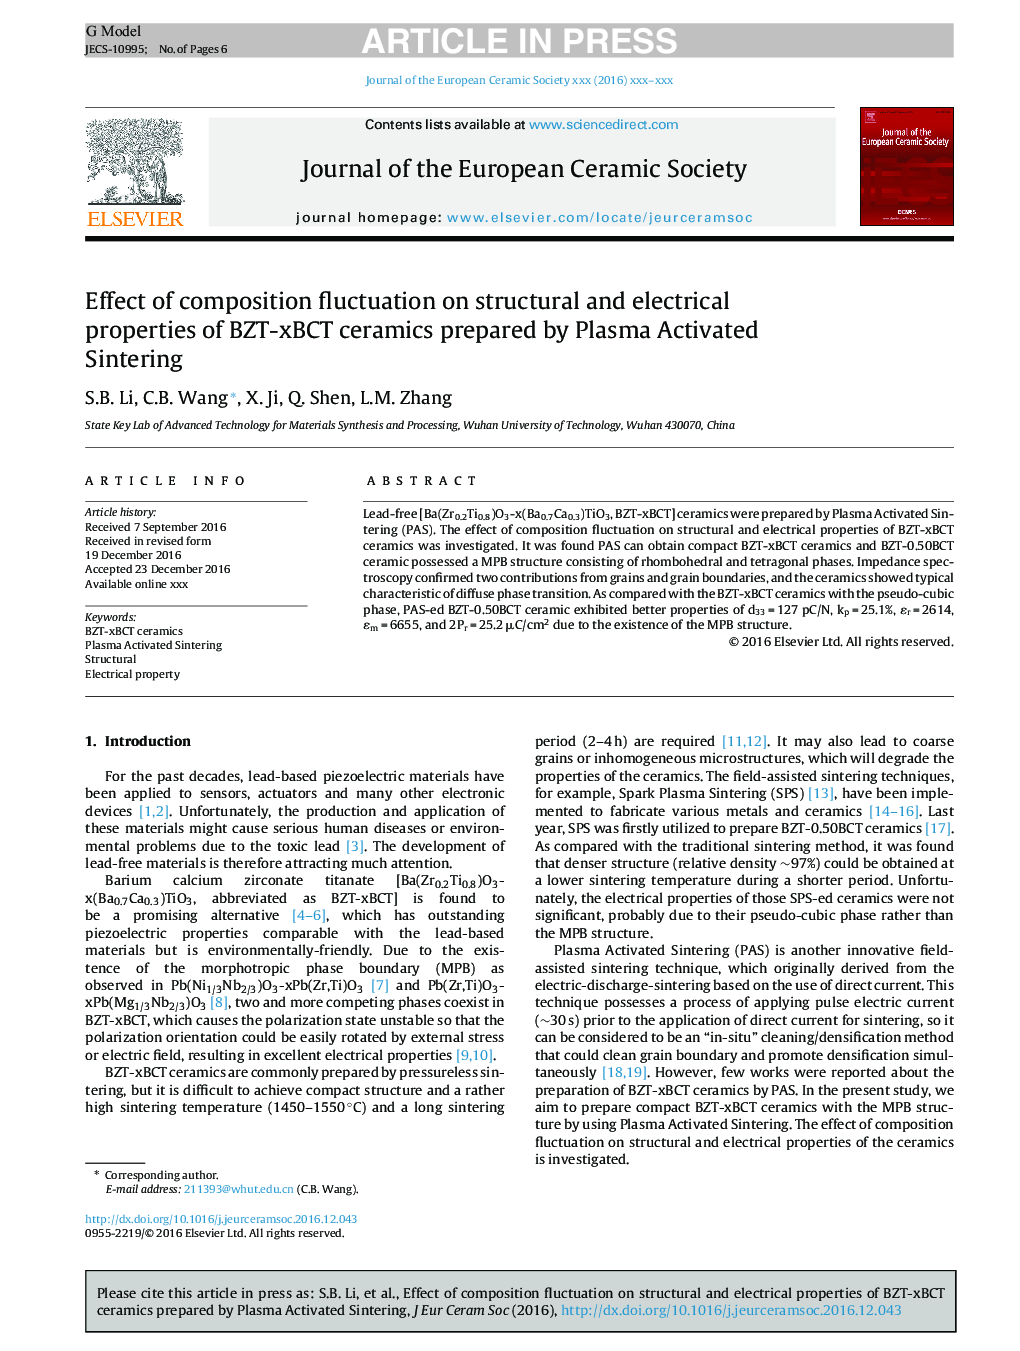 Effect of composition fluctuation on structural and electrical properties of BZT-xBCT ceramics prepared by Plasma Activated Sintering